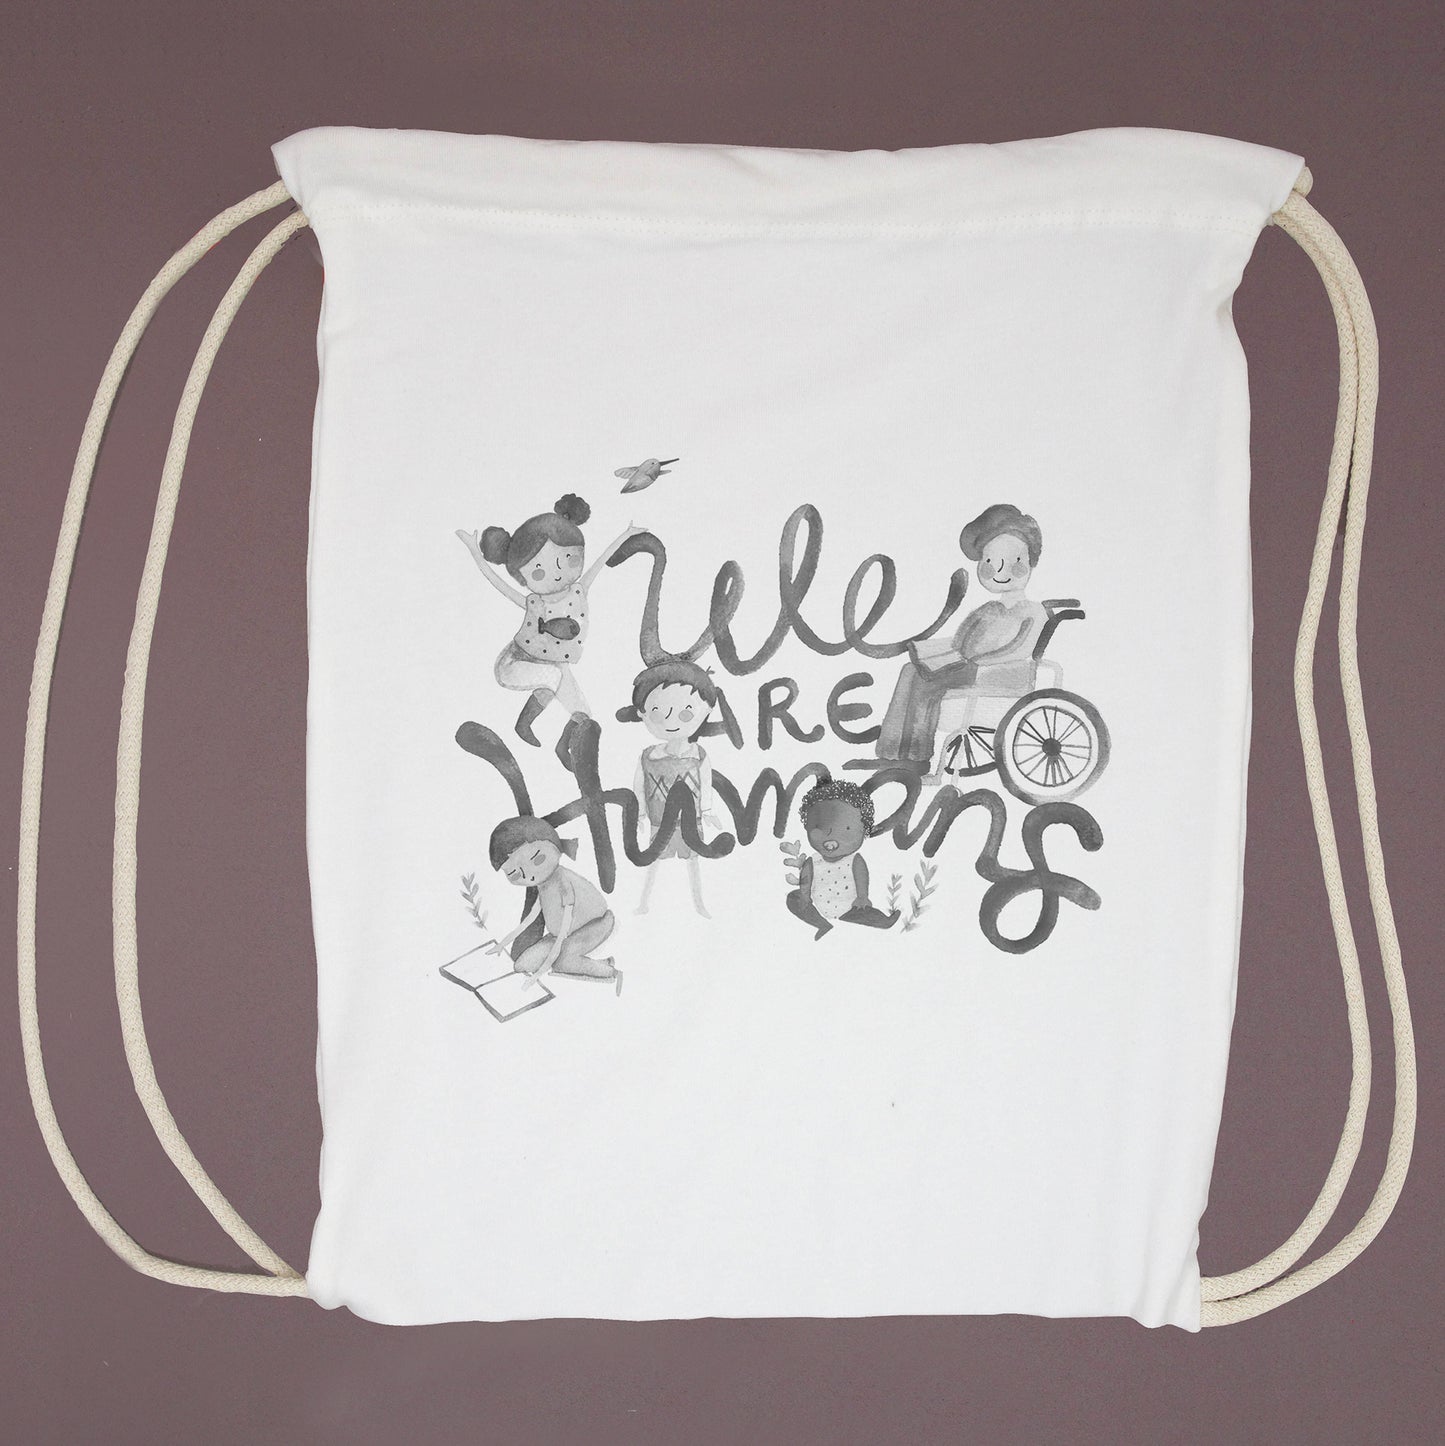 We are humans Tote Bag